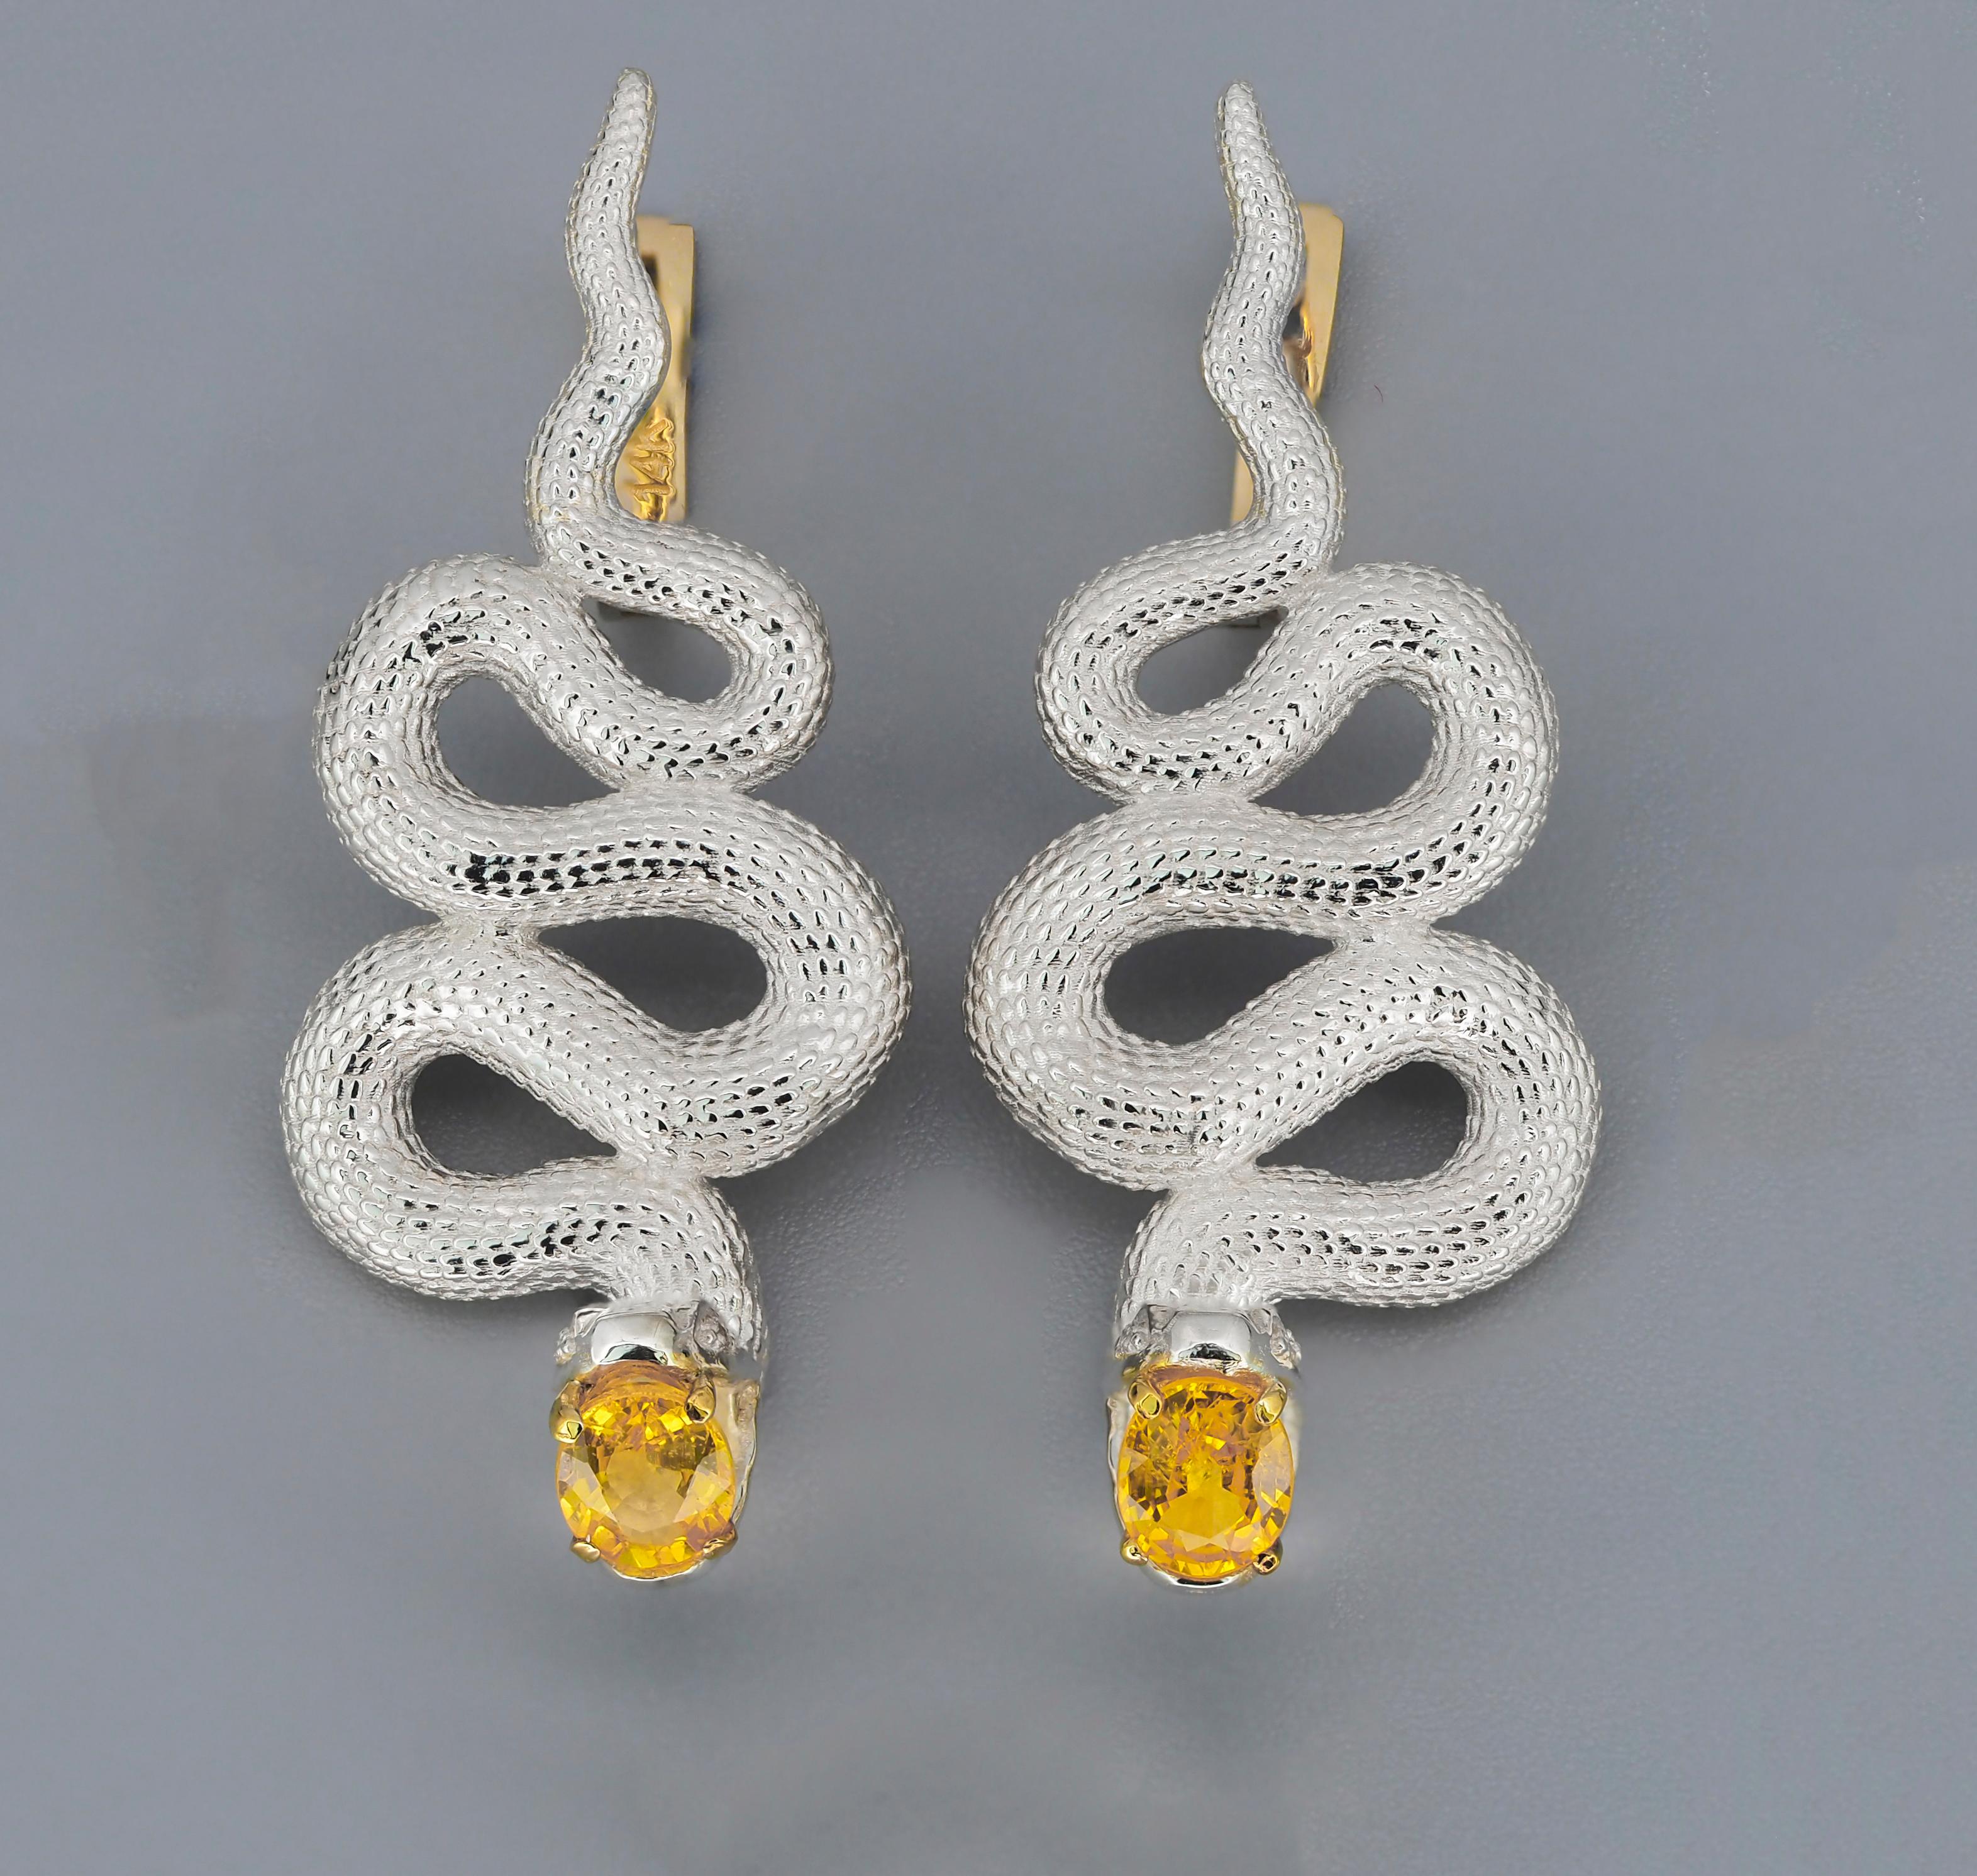 Massive Snake Earrings with Sapphires in Opened Mouth and Diamonds in Eyes For Sale 2